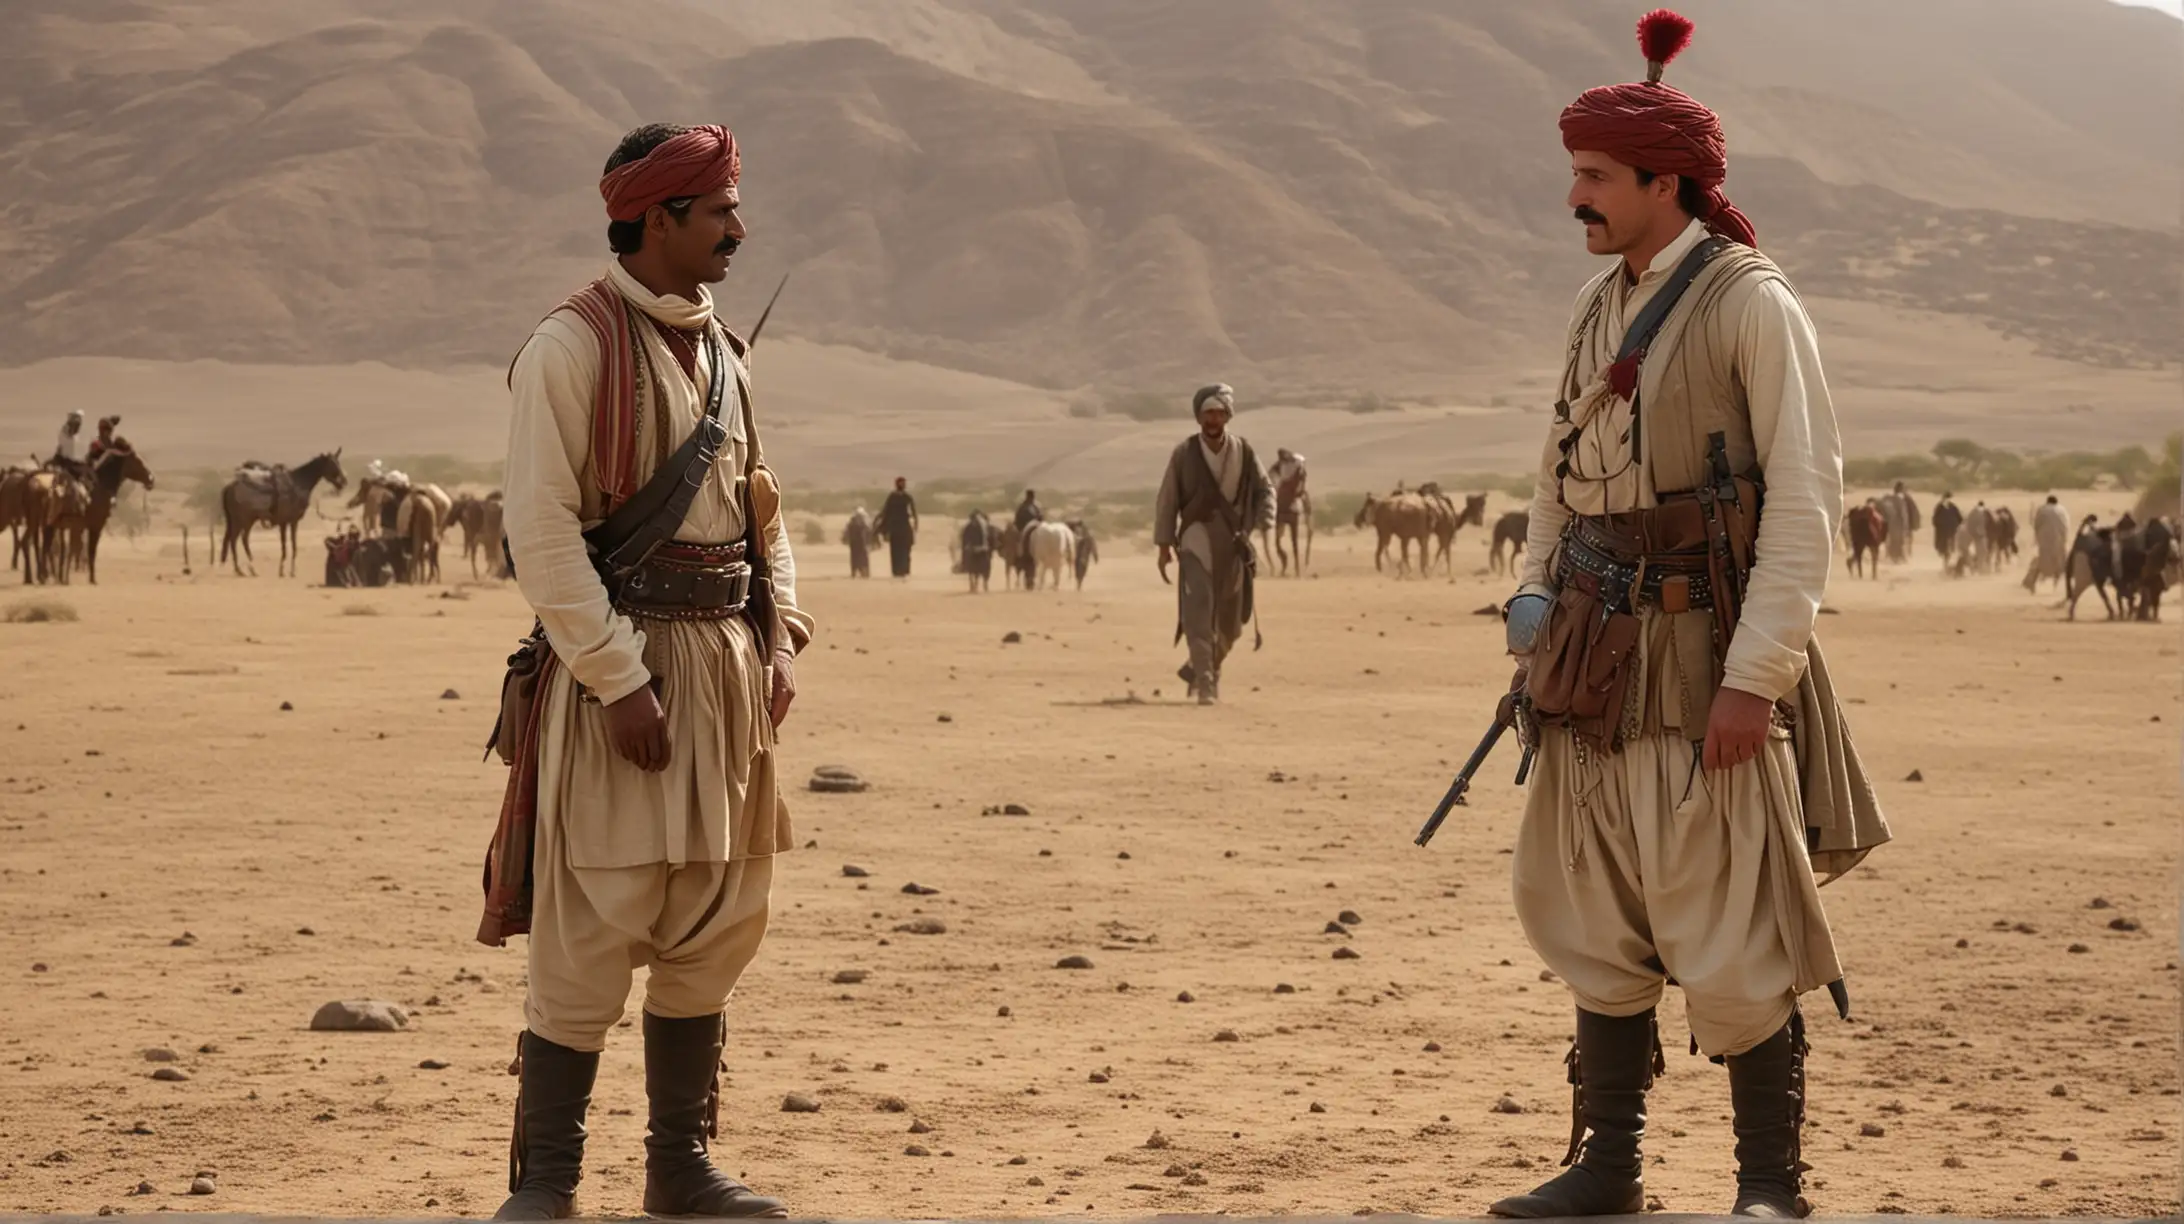 Colonial British Governor Negotiating with Baloch Tribal Man Cinematic Scene